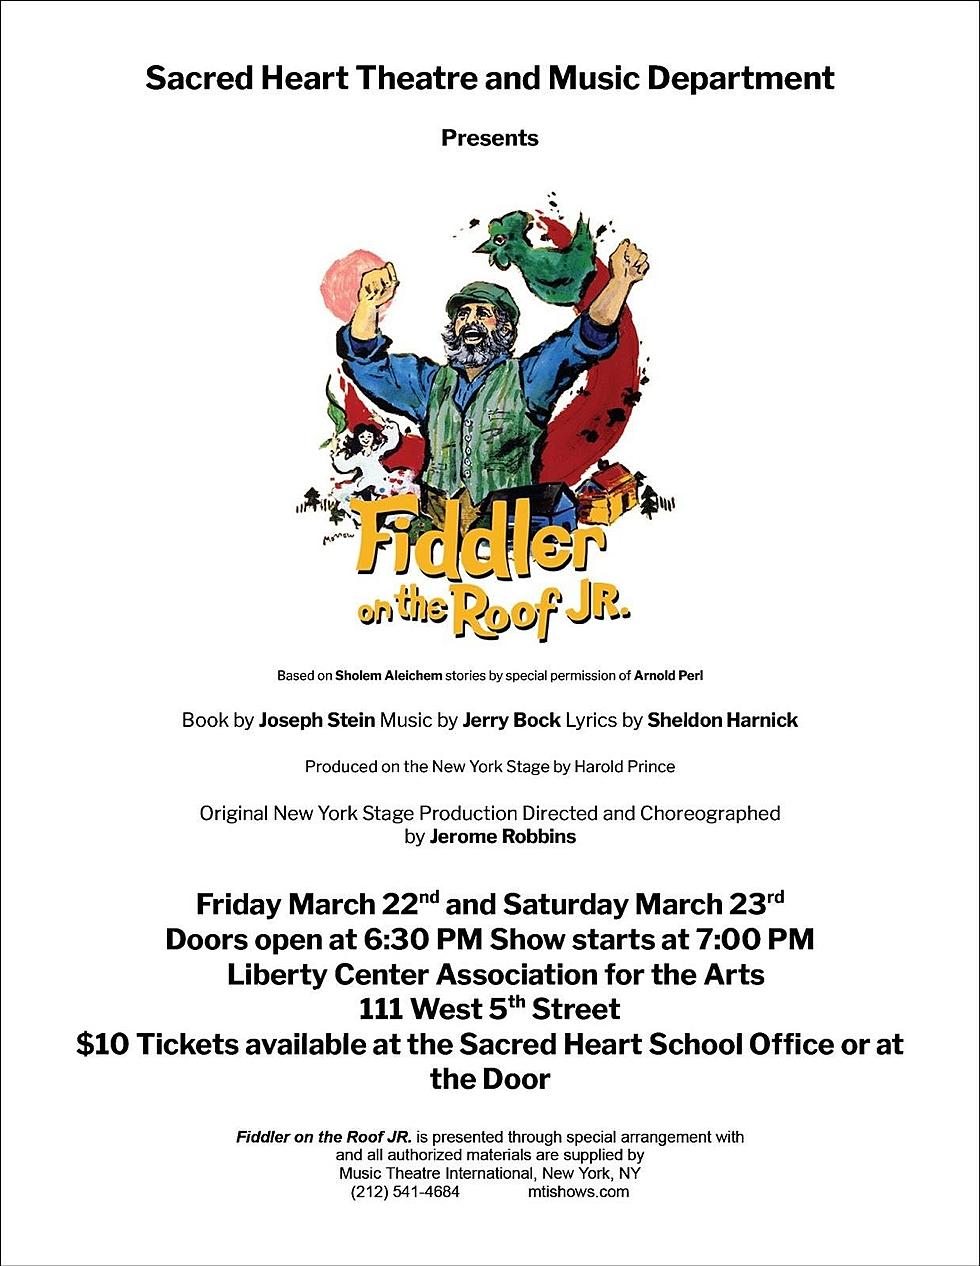 Fiddler on the Roof, Junior To Be Presented at Sacred Heart School